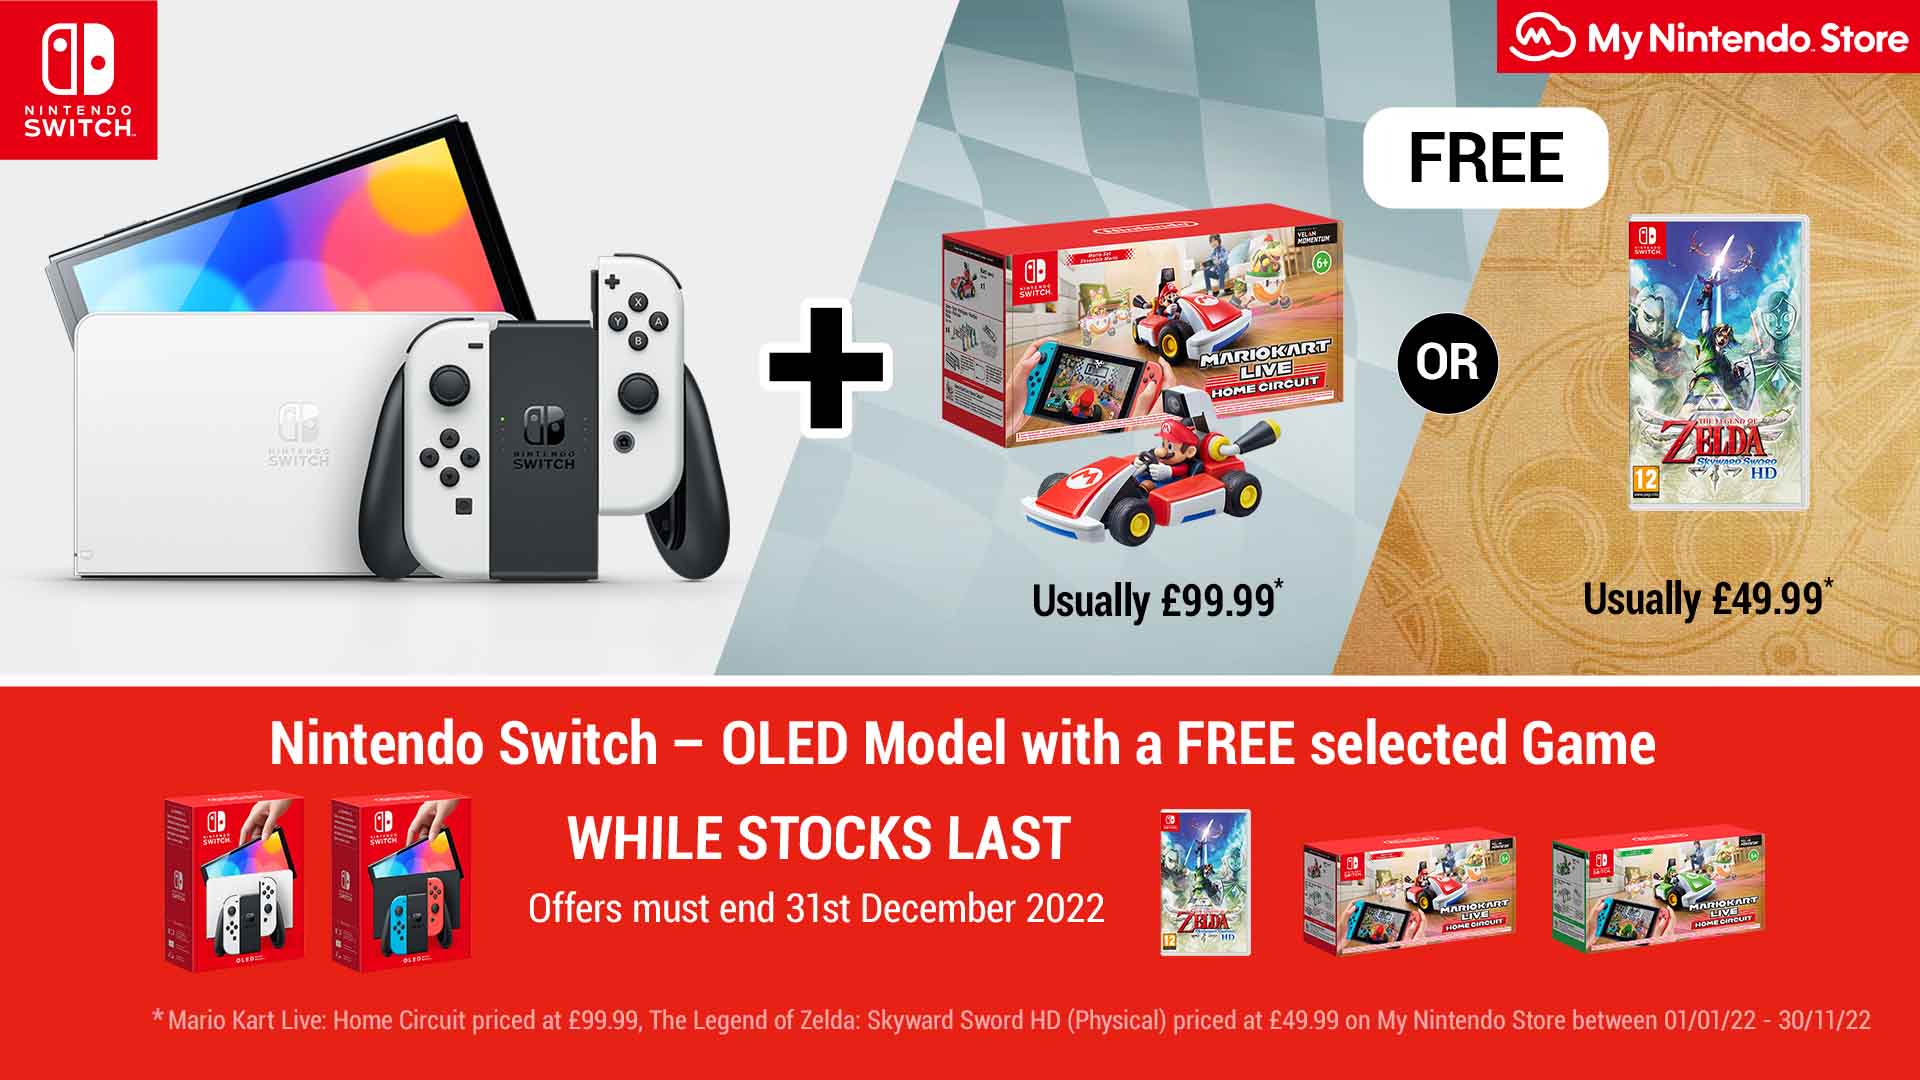 Nintendo Store UK is giving away a free game with Switch OLED purchases | GodisaGeek.com